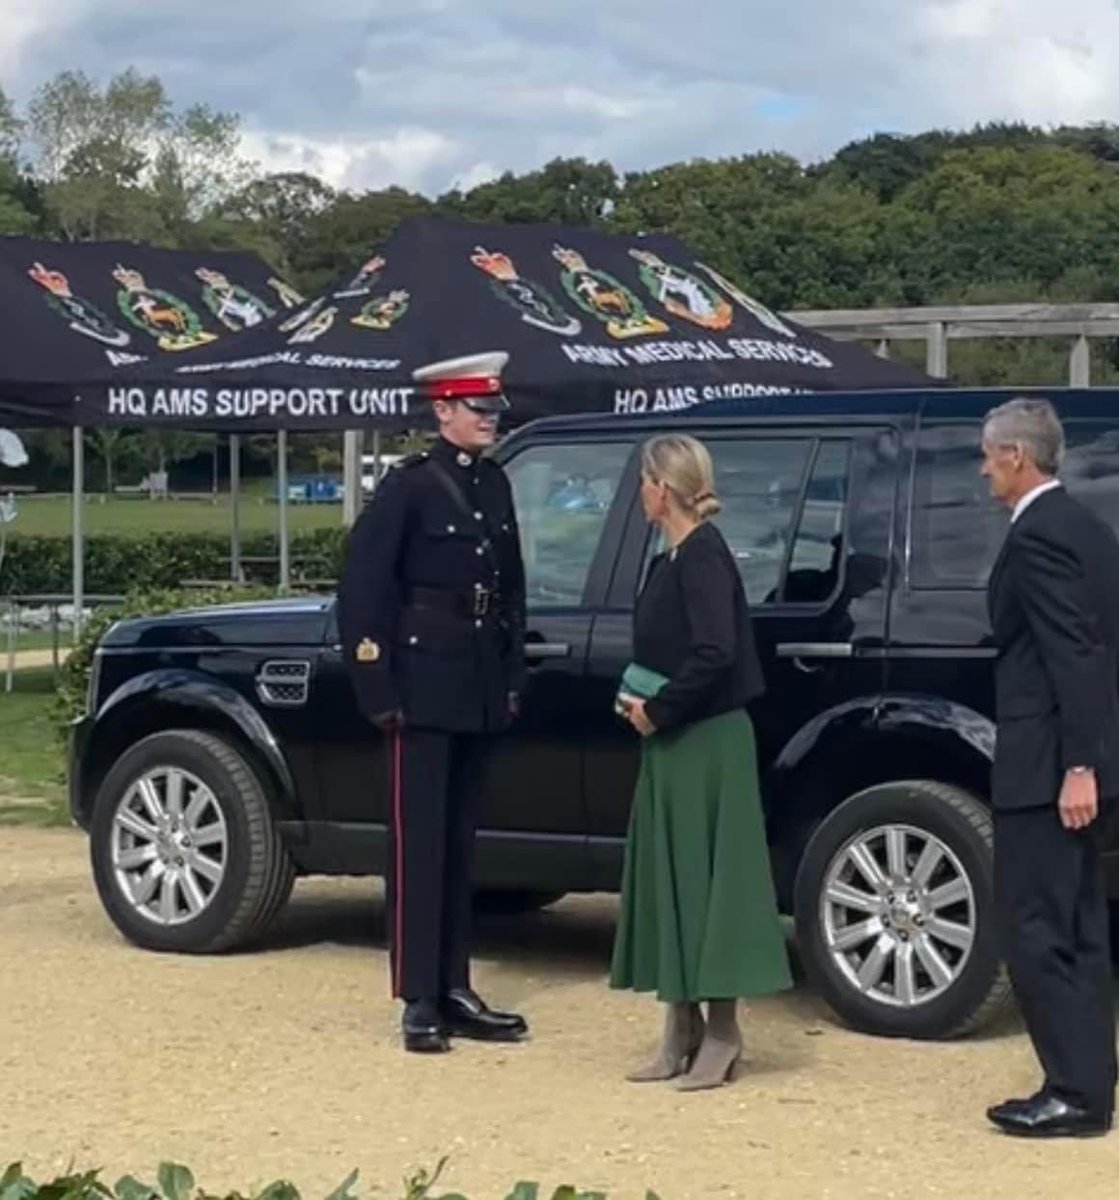 Today our Cadet RSM, had the privilege in meeting HRH The Countess of Wessex on one of his final duties in his tenure as #LordLieutenant Cadet for Hampshire. 

What an honour to represent the @VCCcadets & have a one to one conversation with a member of the @RoyalFamily.